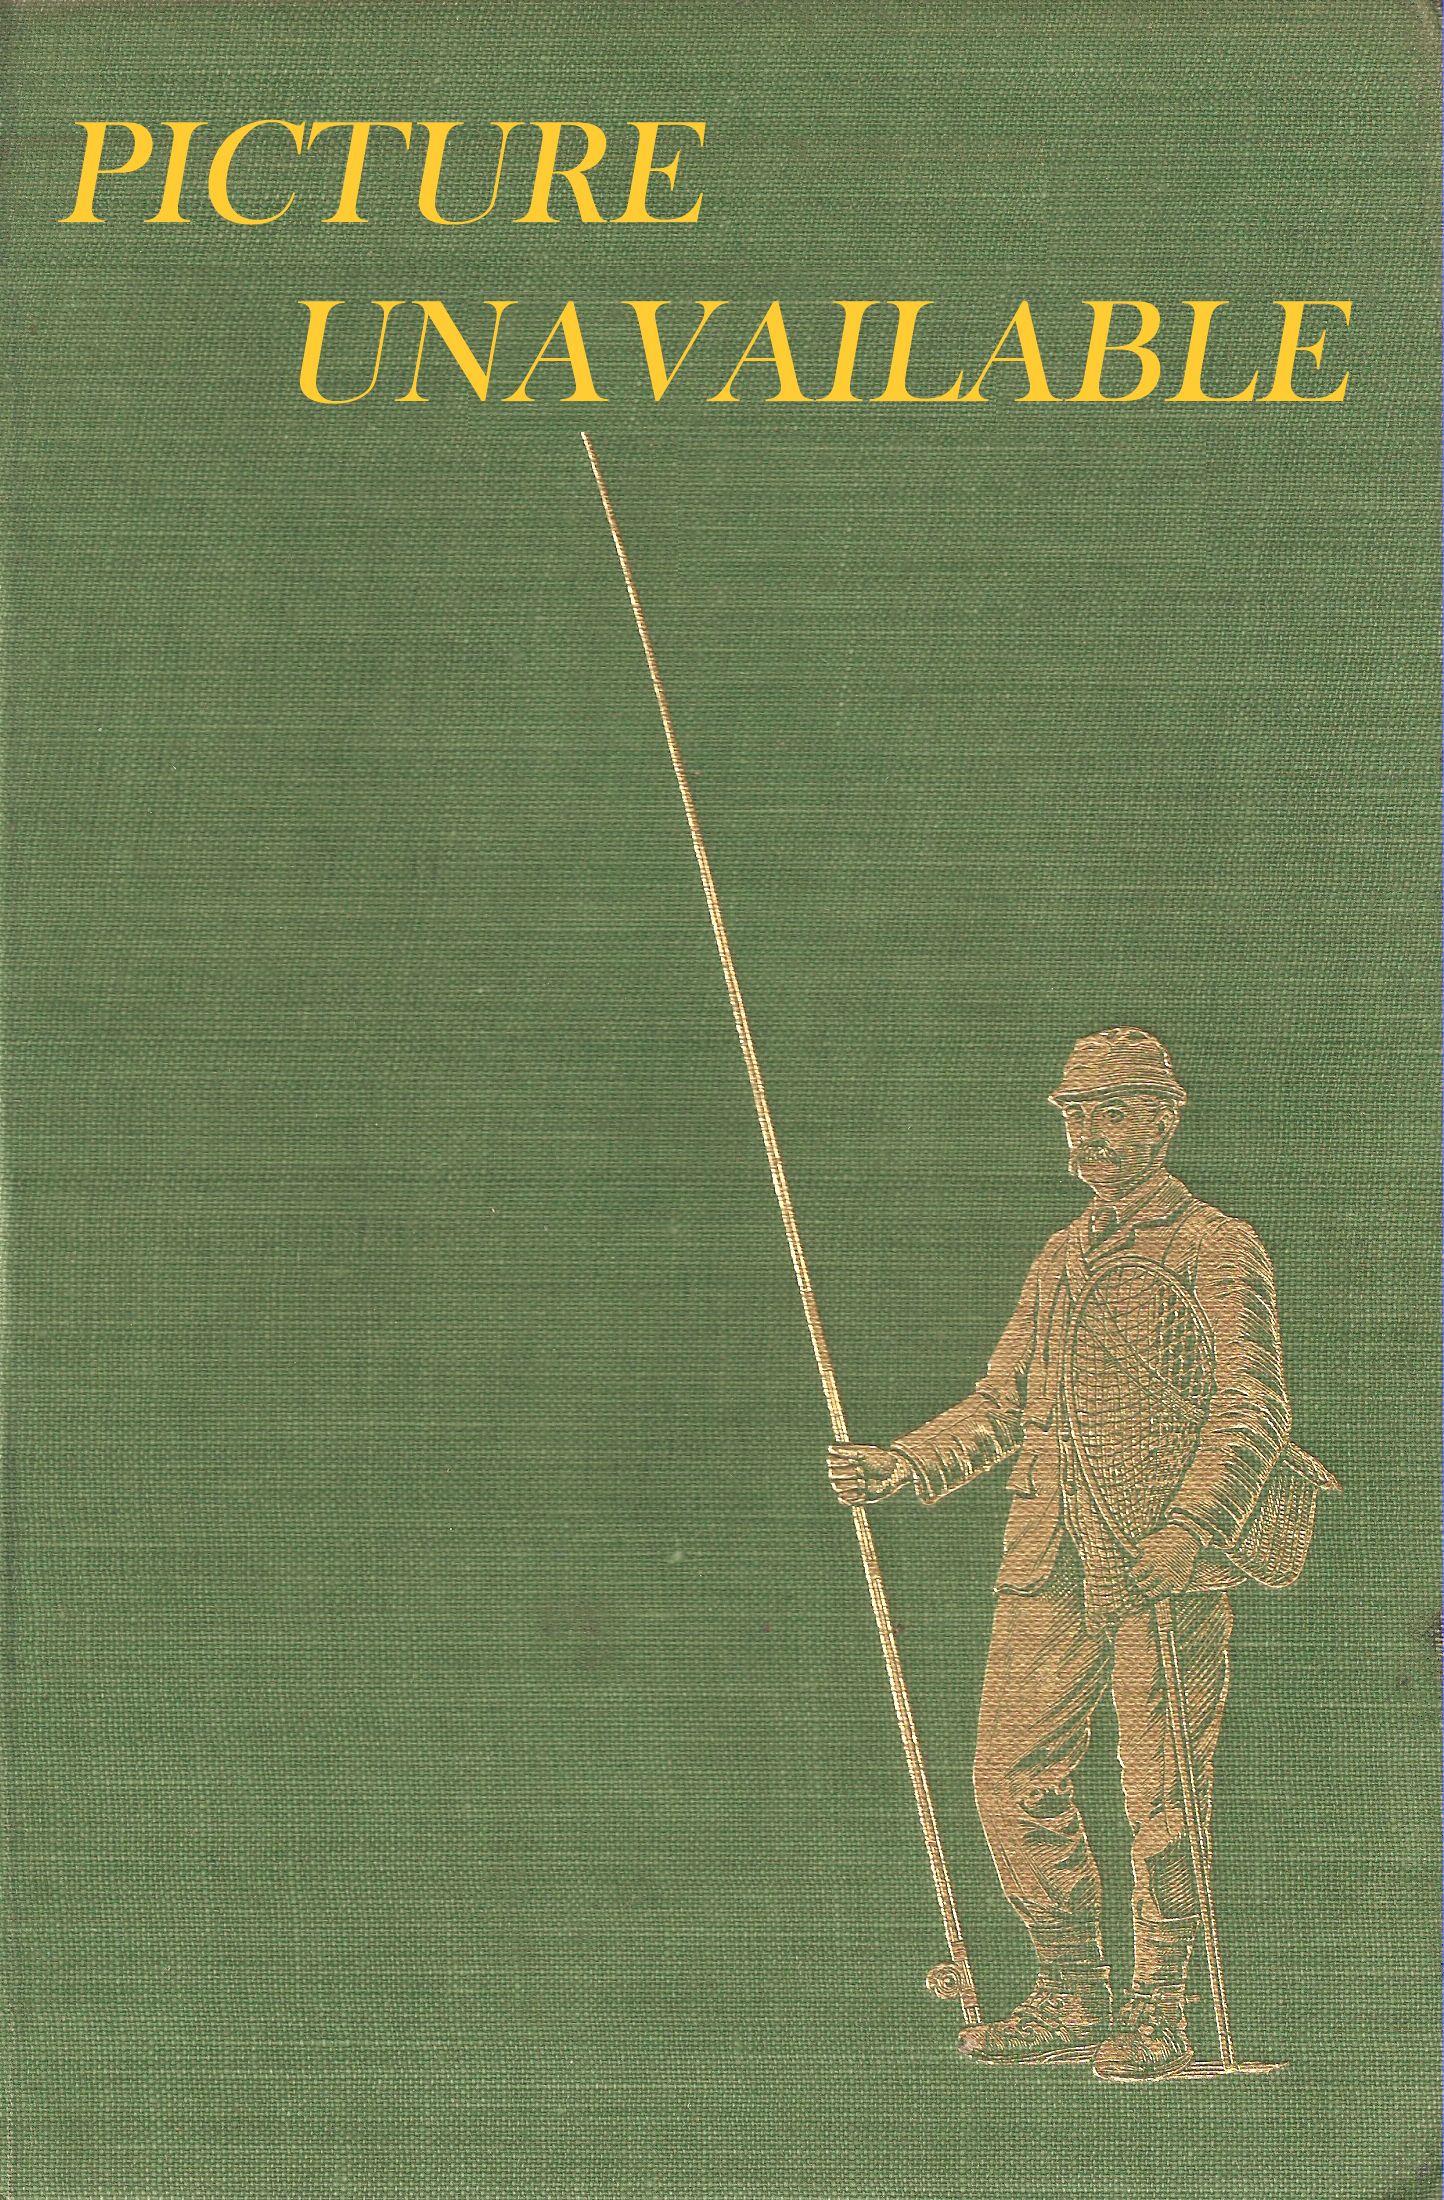 NORTHUMBRIAN ANGLERS' FEDERATION. HANDBOOK AND GUIDE TO NORTH COUNTRY  ANGLING 1958. Compiled by Capt. Chas. C. Duncan, Mr. J.L. Hardy and Mr. E.  Lister on behalf of the Committee.